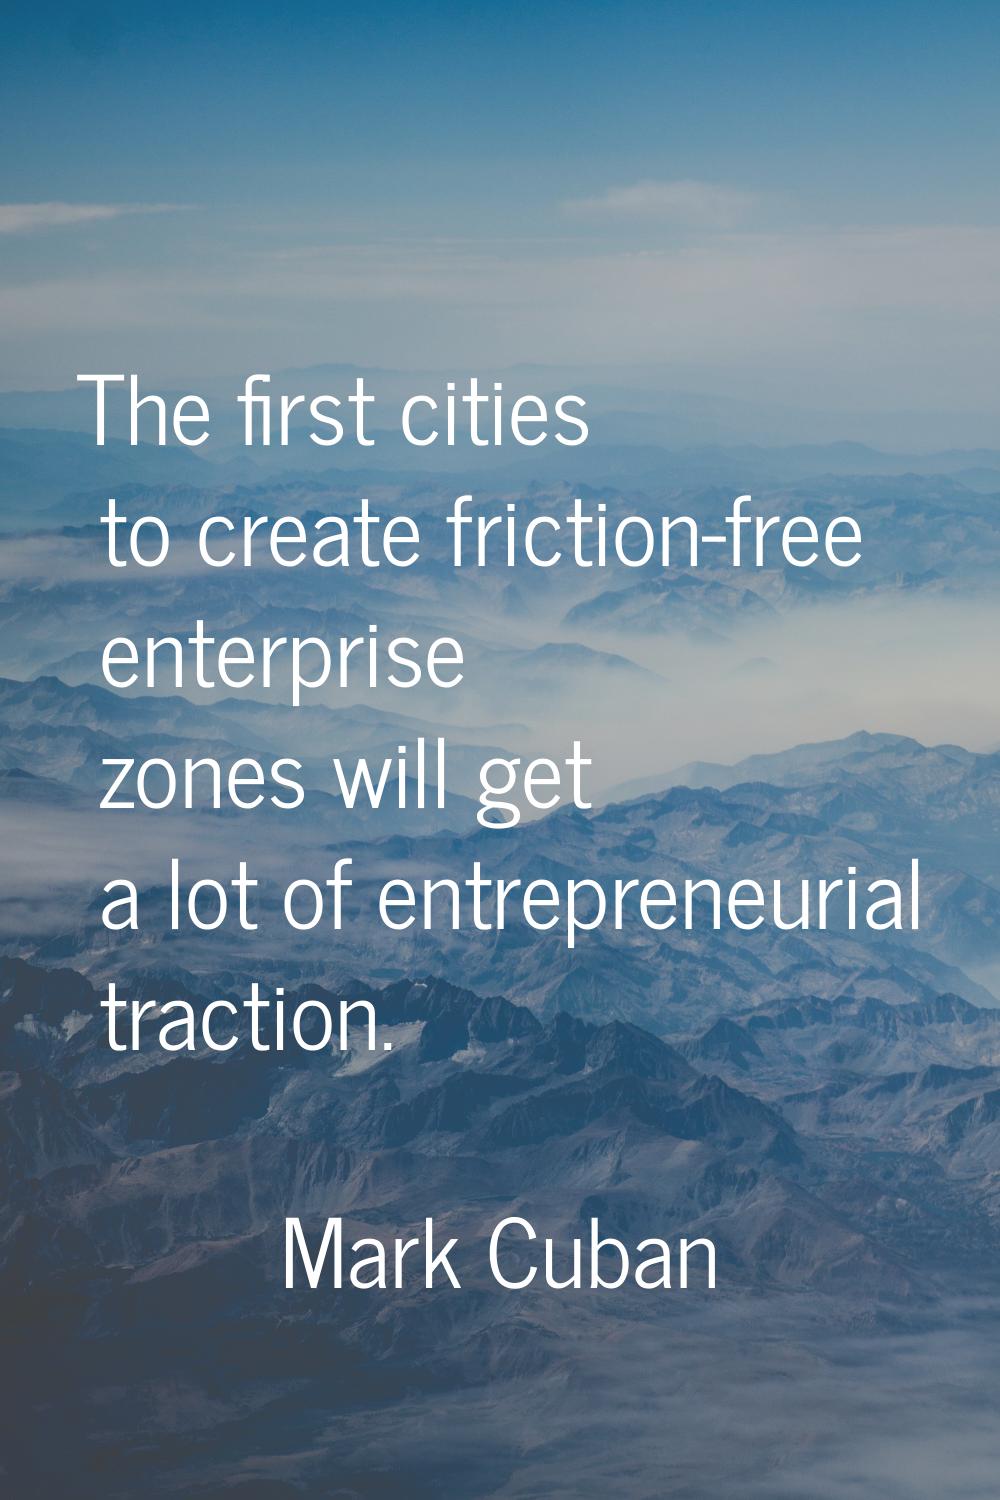 The first cities to create friction-free enterprise zones will get a lot of entrepreneurial tractio